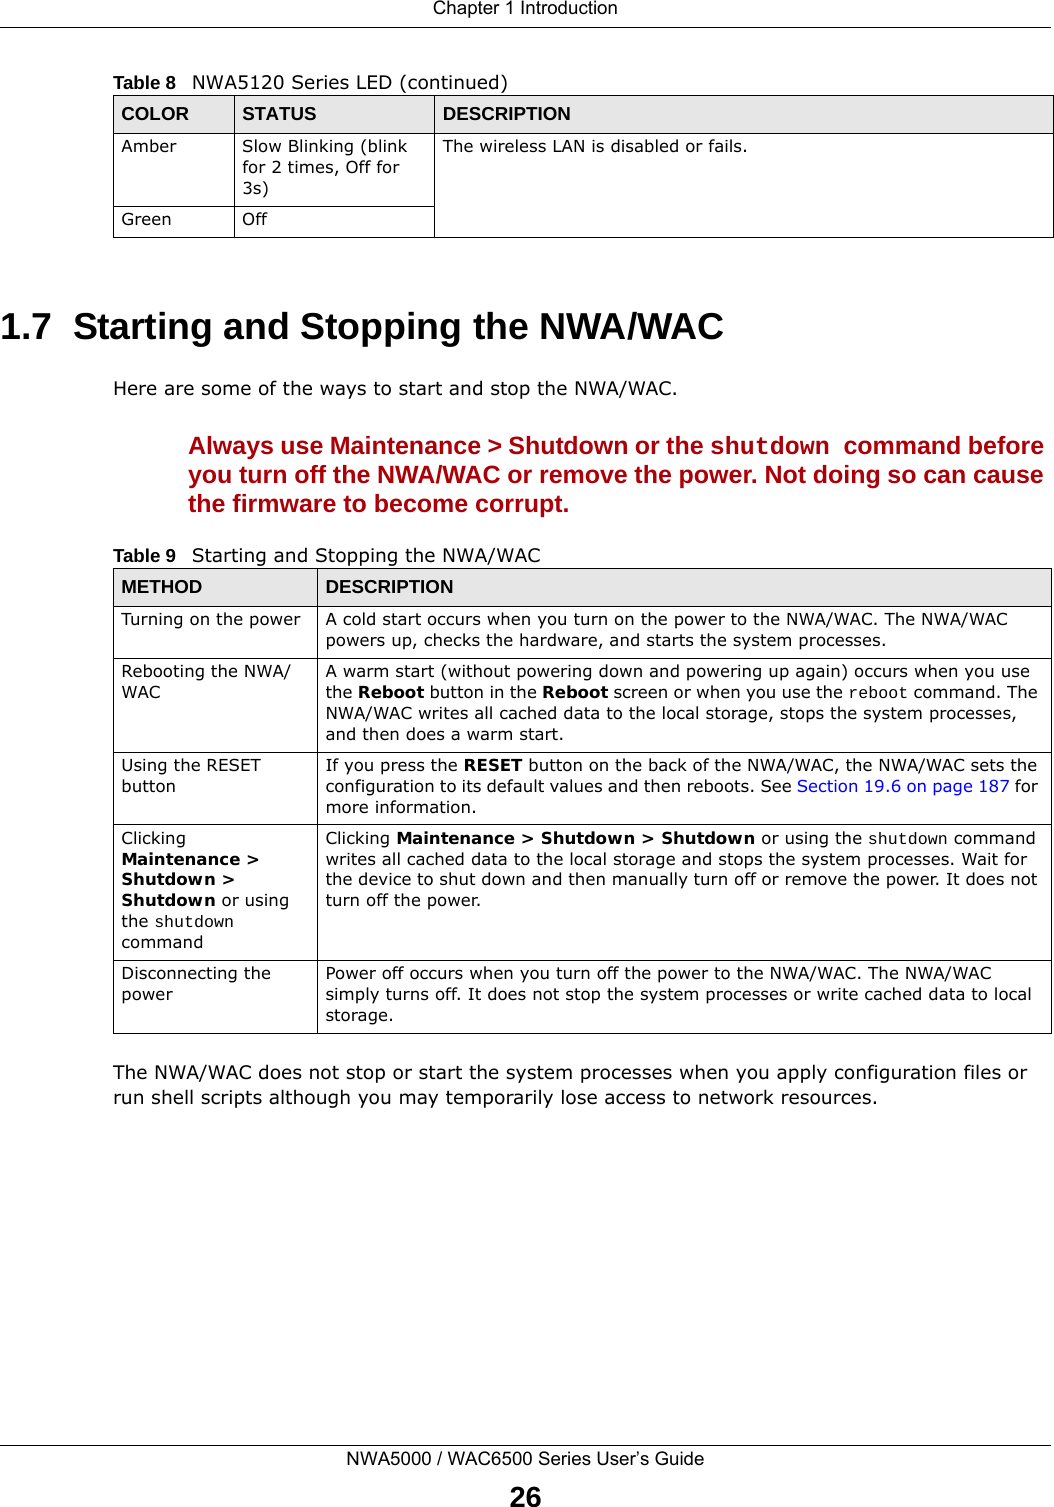 Chapter 1 IntroductionNWA5000 / WAC6500 Series User’s Guide261.7  Starting and Stopping the NWA/WACHere are some of the ways to start and stop the NWA/WAC.Always use Maintenance &gt; Shutdown or the shutdown command before you turn off the NWA/WAC or remove the power. Not doing so can cause the firmware to become corrupt. The NWA/WAC does not stop or start the system processes when you apply configuration files or run shell scripts although you may temporarily lose access to network resources.Amber Slow Blinking (blink for 2 times, Off for 3s)The wireless LAN is disabled or fails.Green OffTable 8   NWA5120 Series LED (continued)COLOR STATUS DESCRIPTIONTable 9   Starting and Stopping the NWA/WACMETHOD DESCRIPTIONTurning on the power A cold start occurs when you turn on the power to the NWA/WAC. The NWA/WAC powers up, checks the hardware, and starts the system processes.Rebooting the NWA/WACA warm start (without powering down and powering up again) occurs when you use the Reboot button in the Reboot screen or when you use the reboot command. The NWA/WAC writes all cached data to the local storage, stops the system processes, and then does a warm start. Using the RESET buttonIf you press the RESET button on the back of the NWA/WAC, the NWA/WAC sets the configuration to its default values and then reboots. See Section 19.6 on page 187 for more information.Clicking Maintenance &gt; Shutdown &gt; Shutdown or using the shutdown commandClicking Maintenance &gt; Shutdown &gt; Shutdown or using the shutdown command writes all cached data to the local storage and stops the system processes. Wait for the device to shut down and then manually turn off or remove the power. It does not turn off the power. Disconnecting the powerPower off occurs when you turn off the power to the NWA/WAC. The NWA/WAC simply turns off. It does not stop the system processes or write cached data to local storage. 